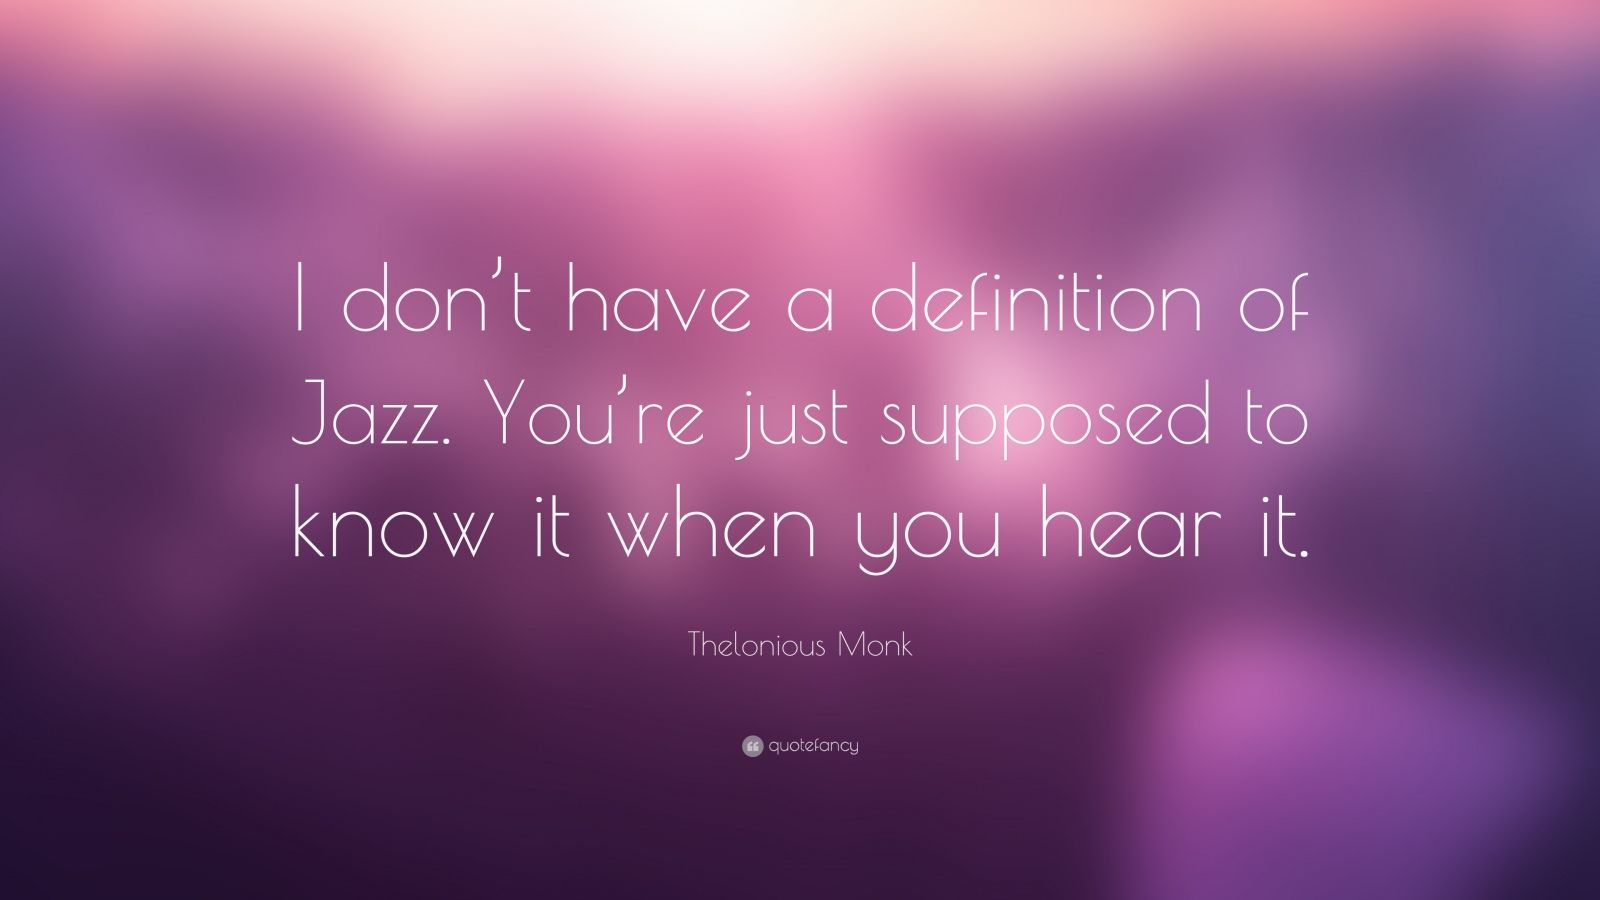 Thelonious Monk Quote: "I don't have a definition of Jazz ...